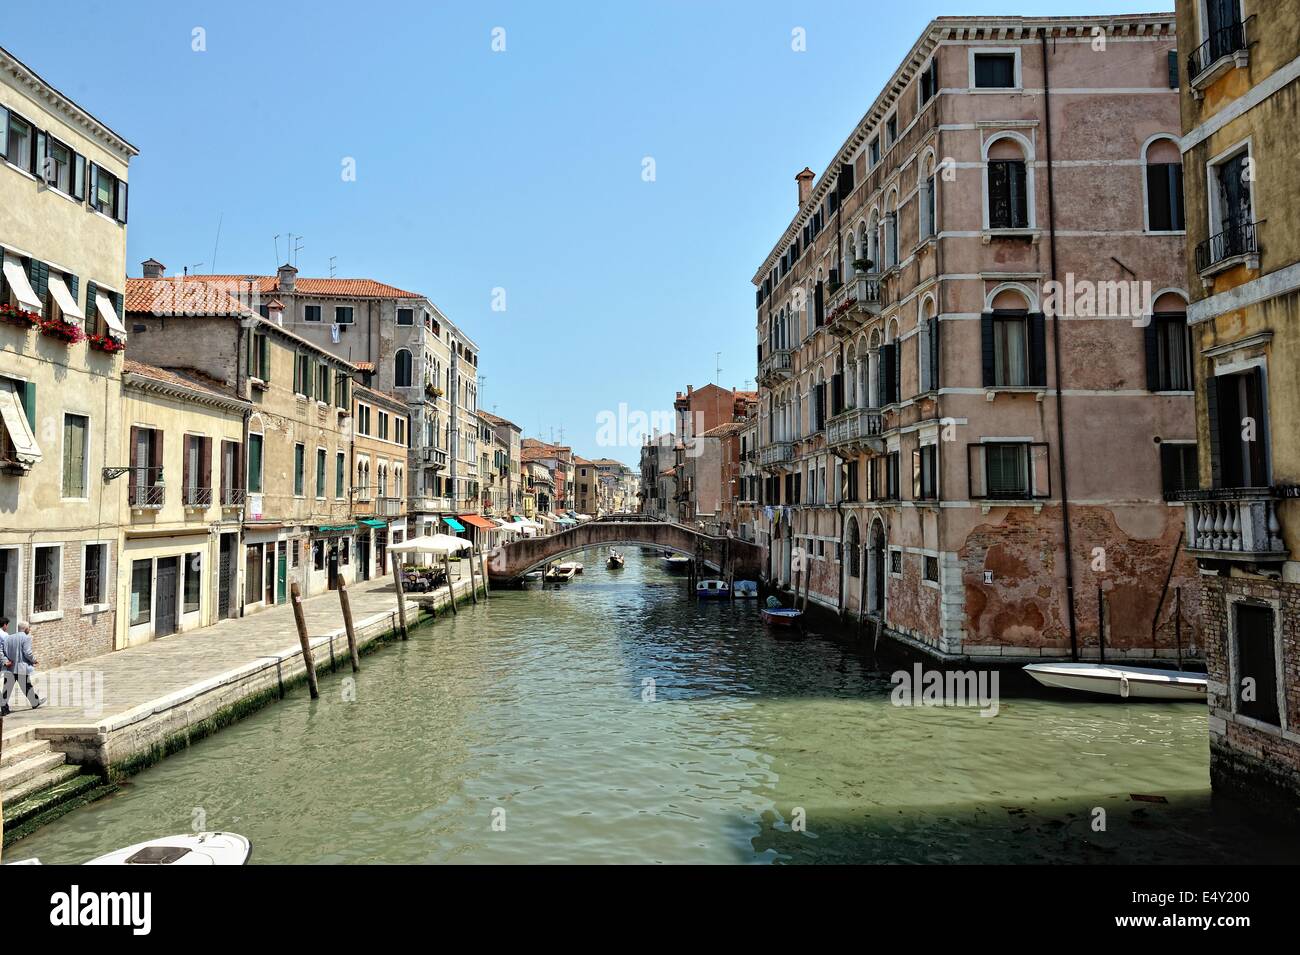 Venetian canal and houses. Stock Photo